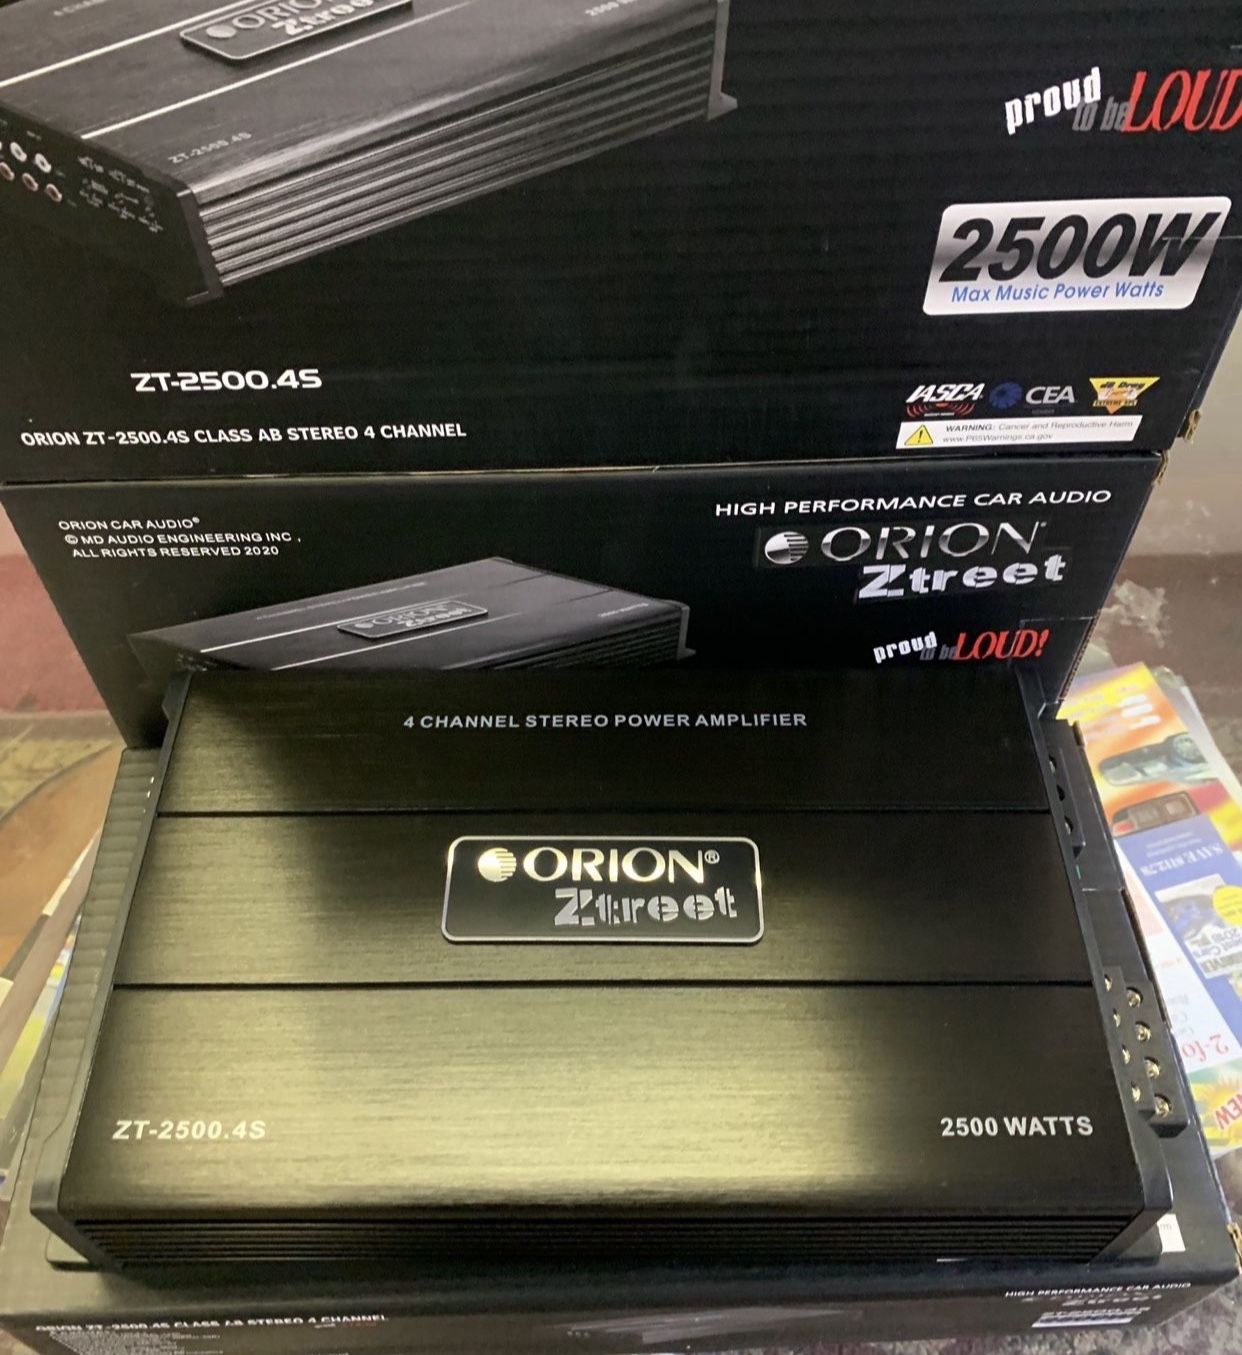 Orion Car Audio . Car Stereo Amplifier . 2500 watts . 4 Channel . New Years Super Sale . $79 While They Last . New